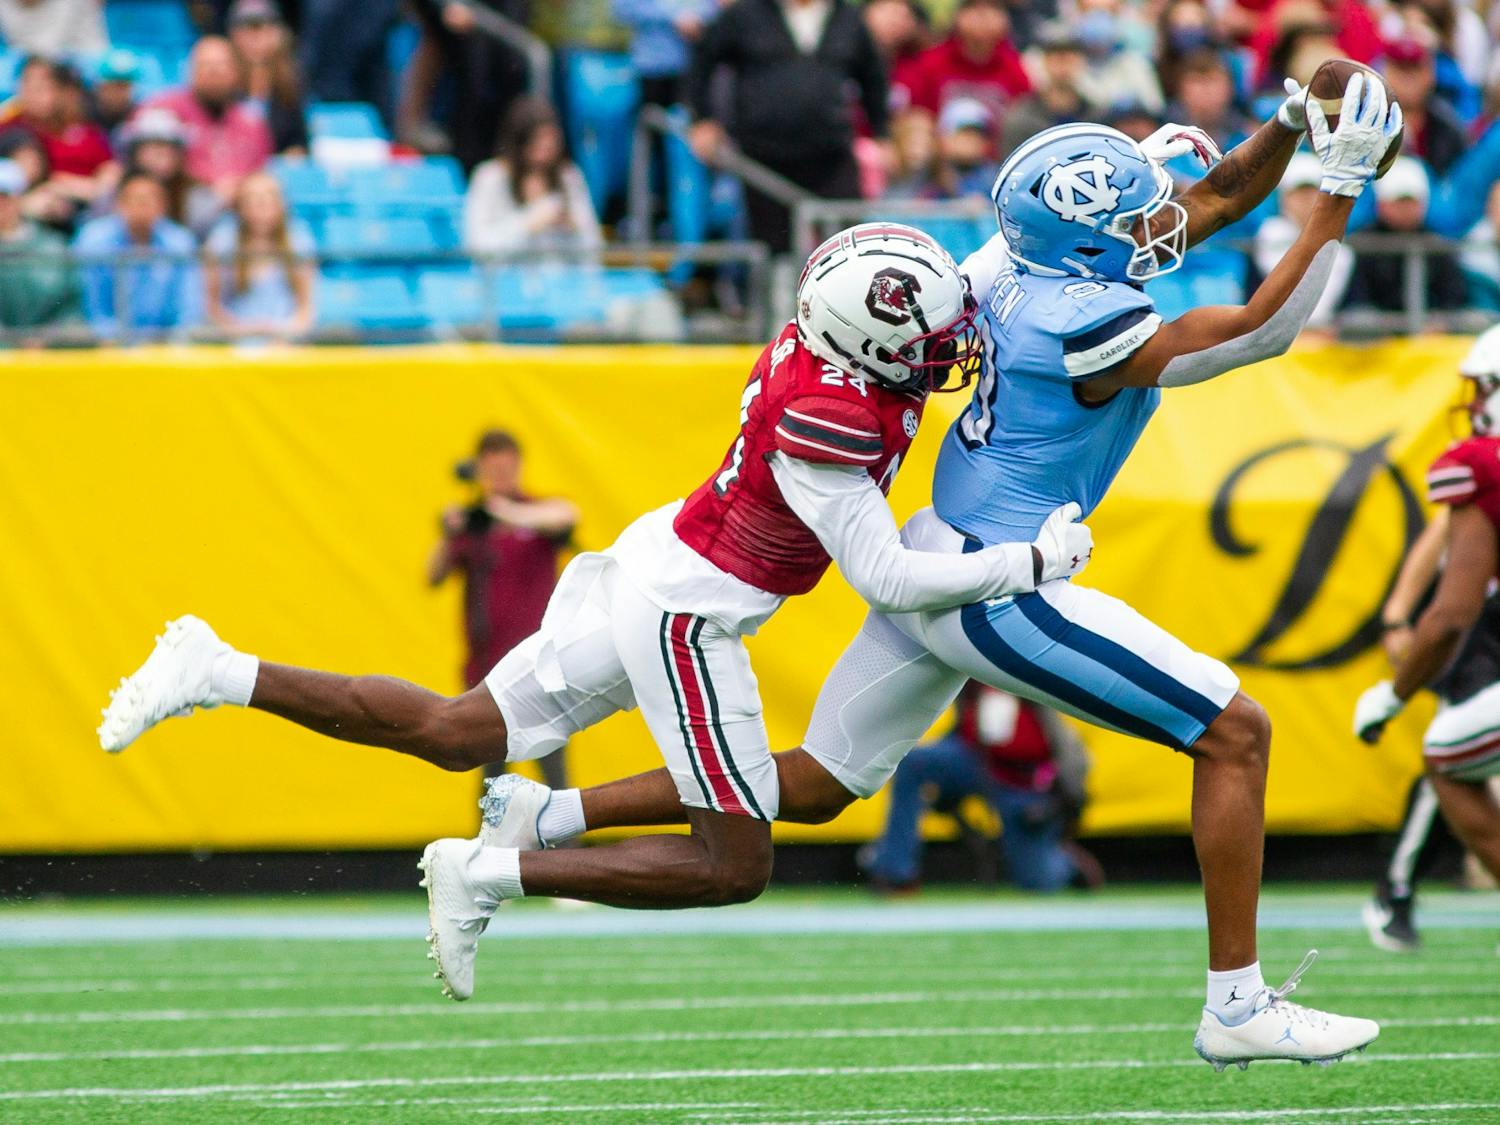 Senior wide receiver Antoine Green (3) catches the ball at the Duke's Mayo Bowl against South Carolina at the Bank of America Stadium in Charlotte on Dec. 30, 2021. UNC lost 21-38.